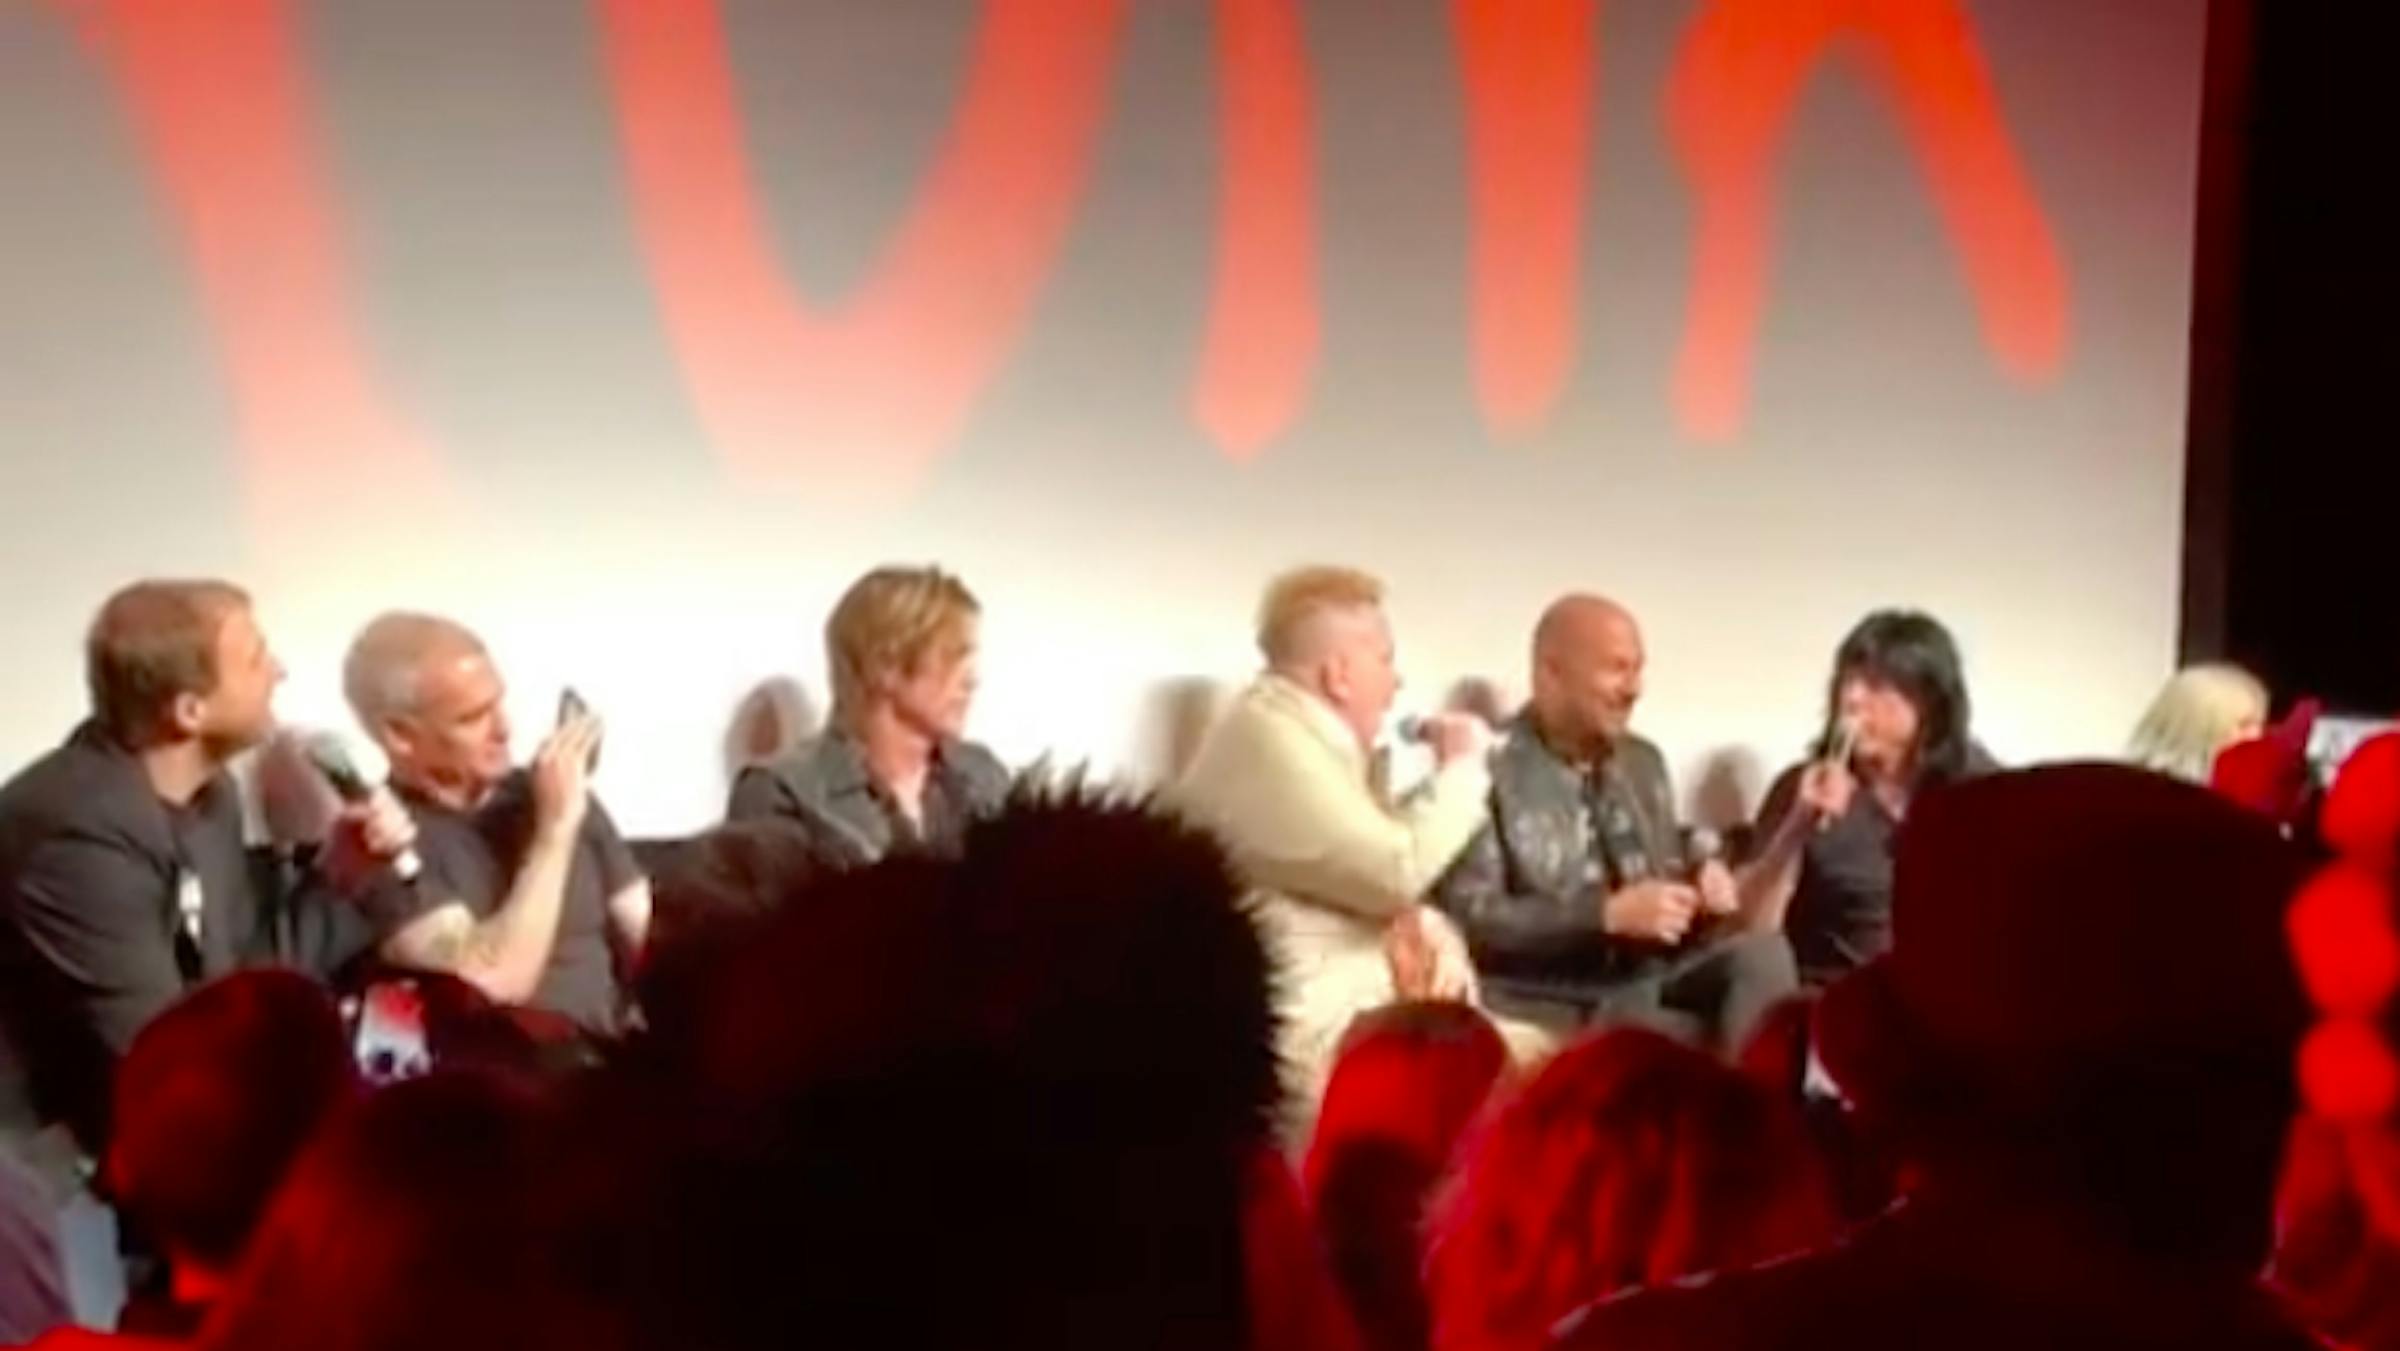 Watch John Lydon Lose It At Marky Ramone: "This Daft C**t Was Into F**king Drugs!"